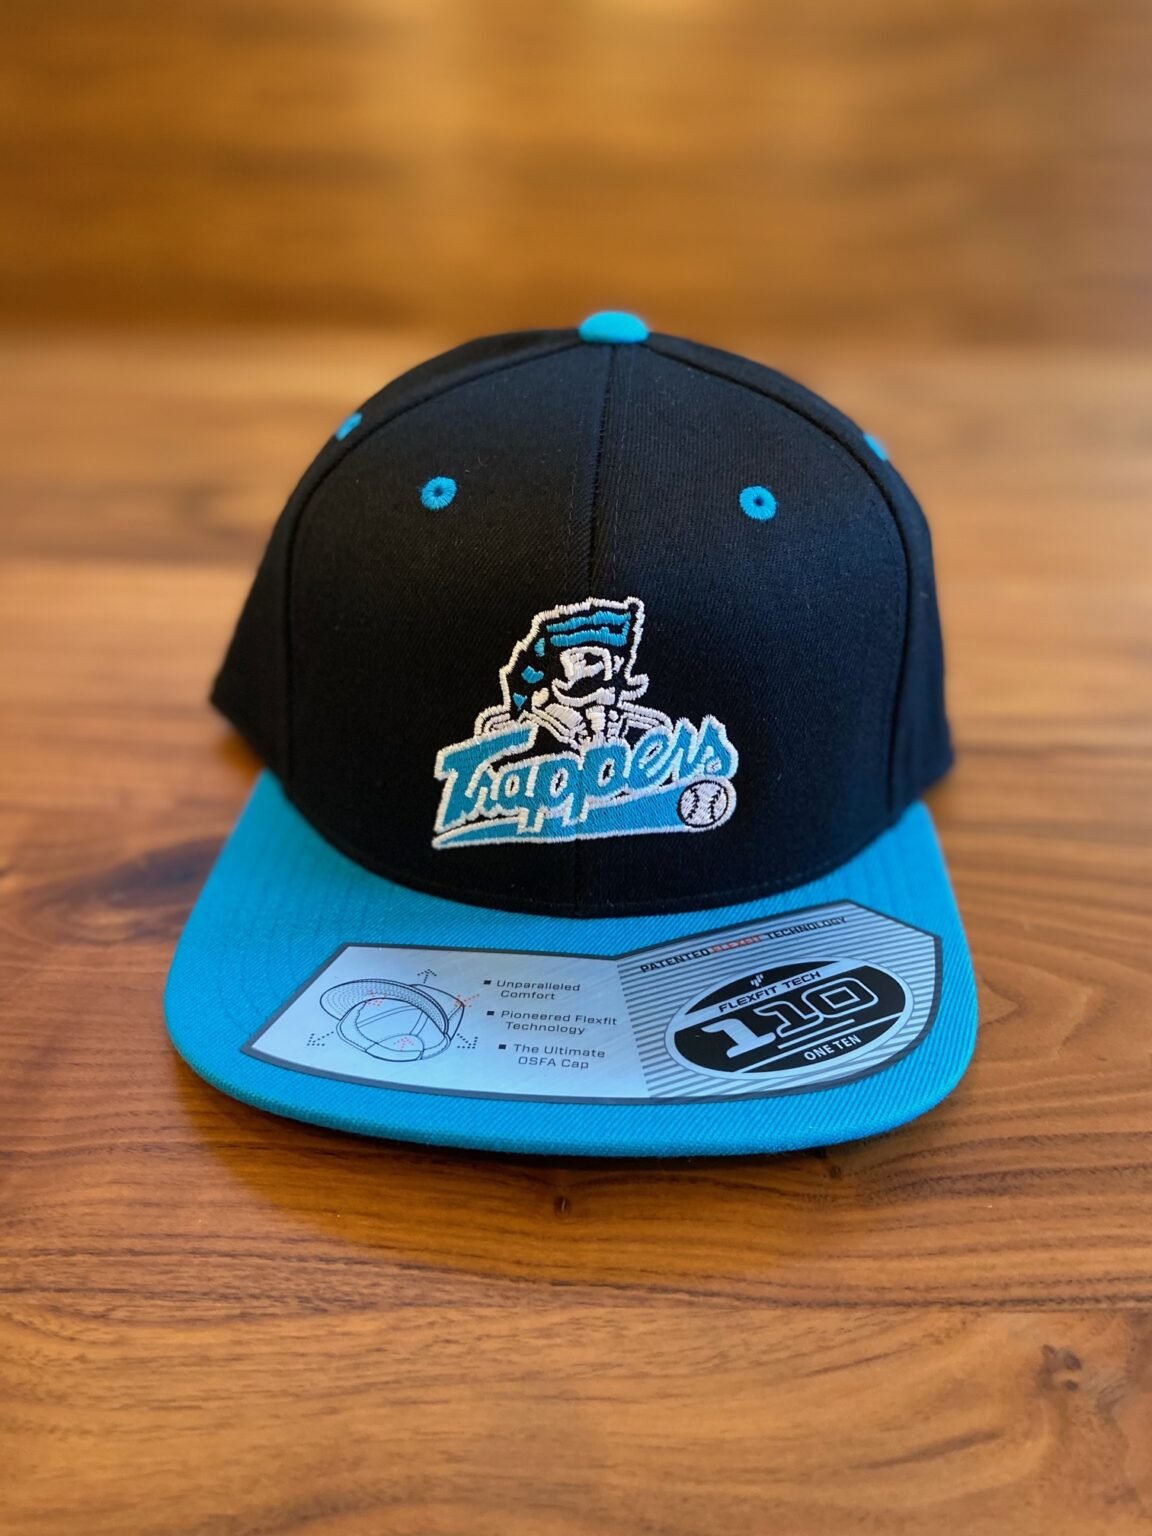 Trappers_96_97_black_teal_snapback_table-1152x1536.jpeg